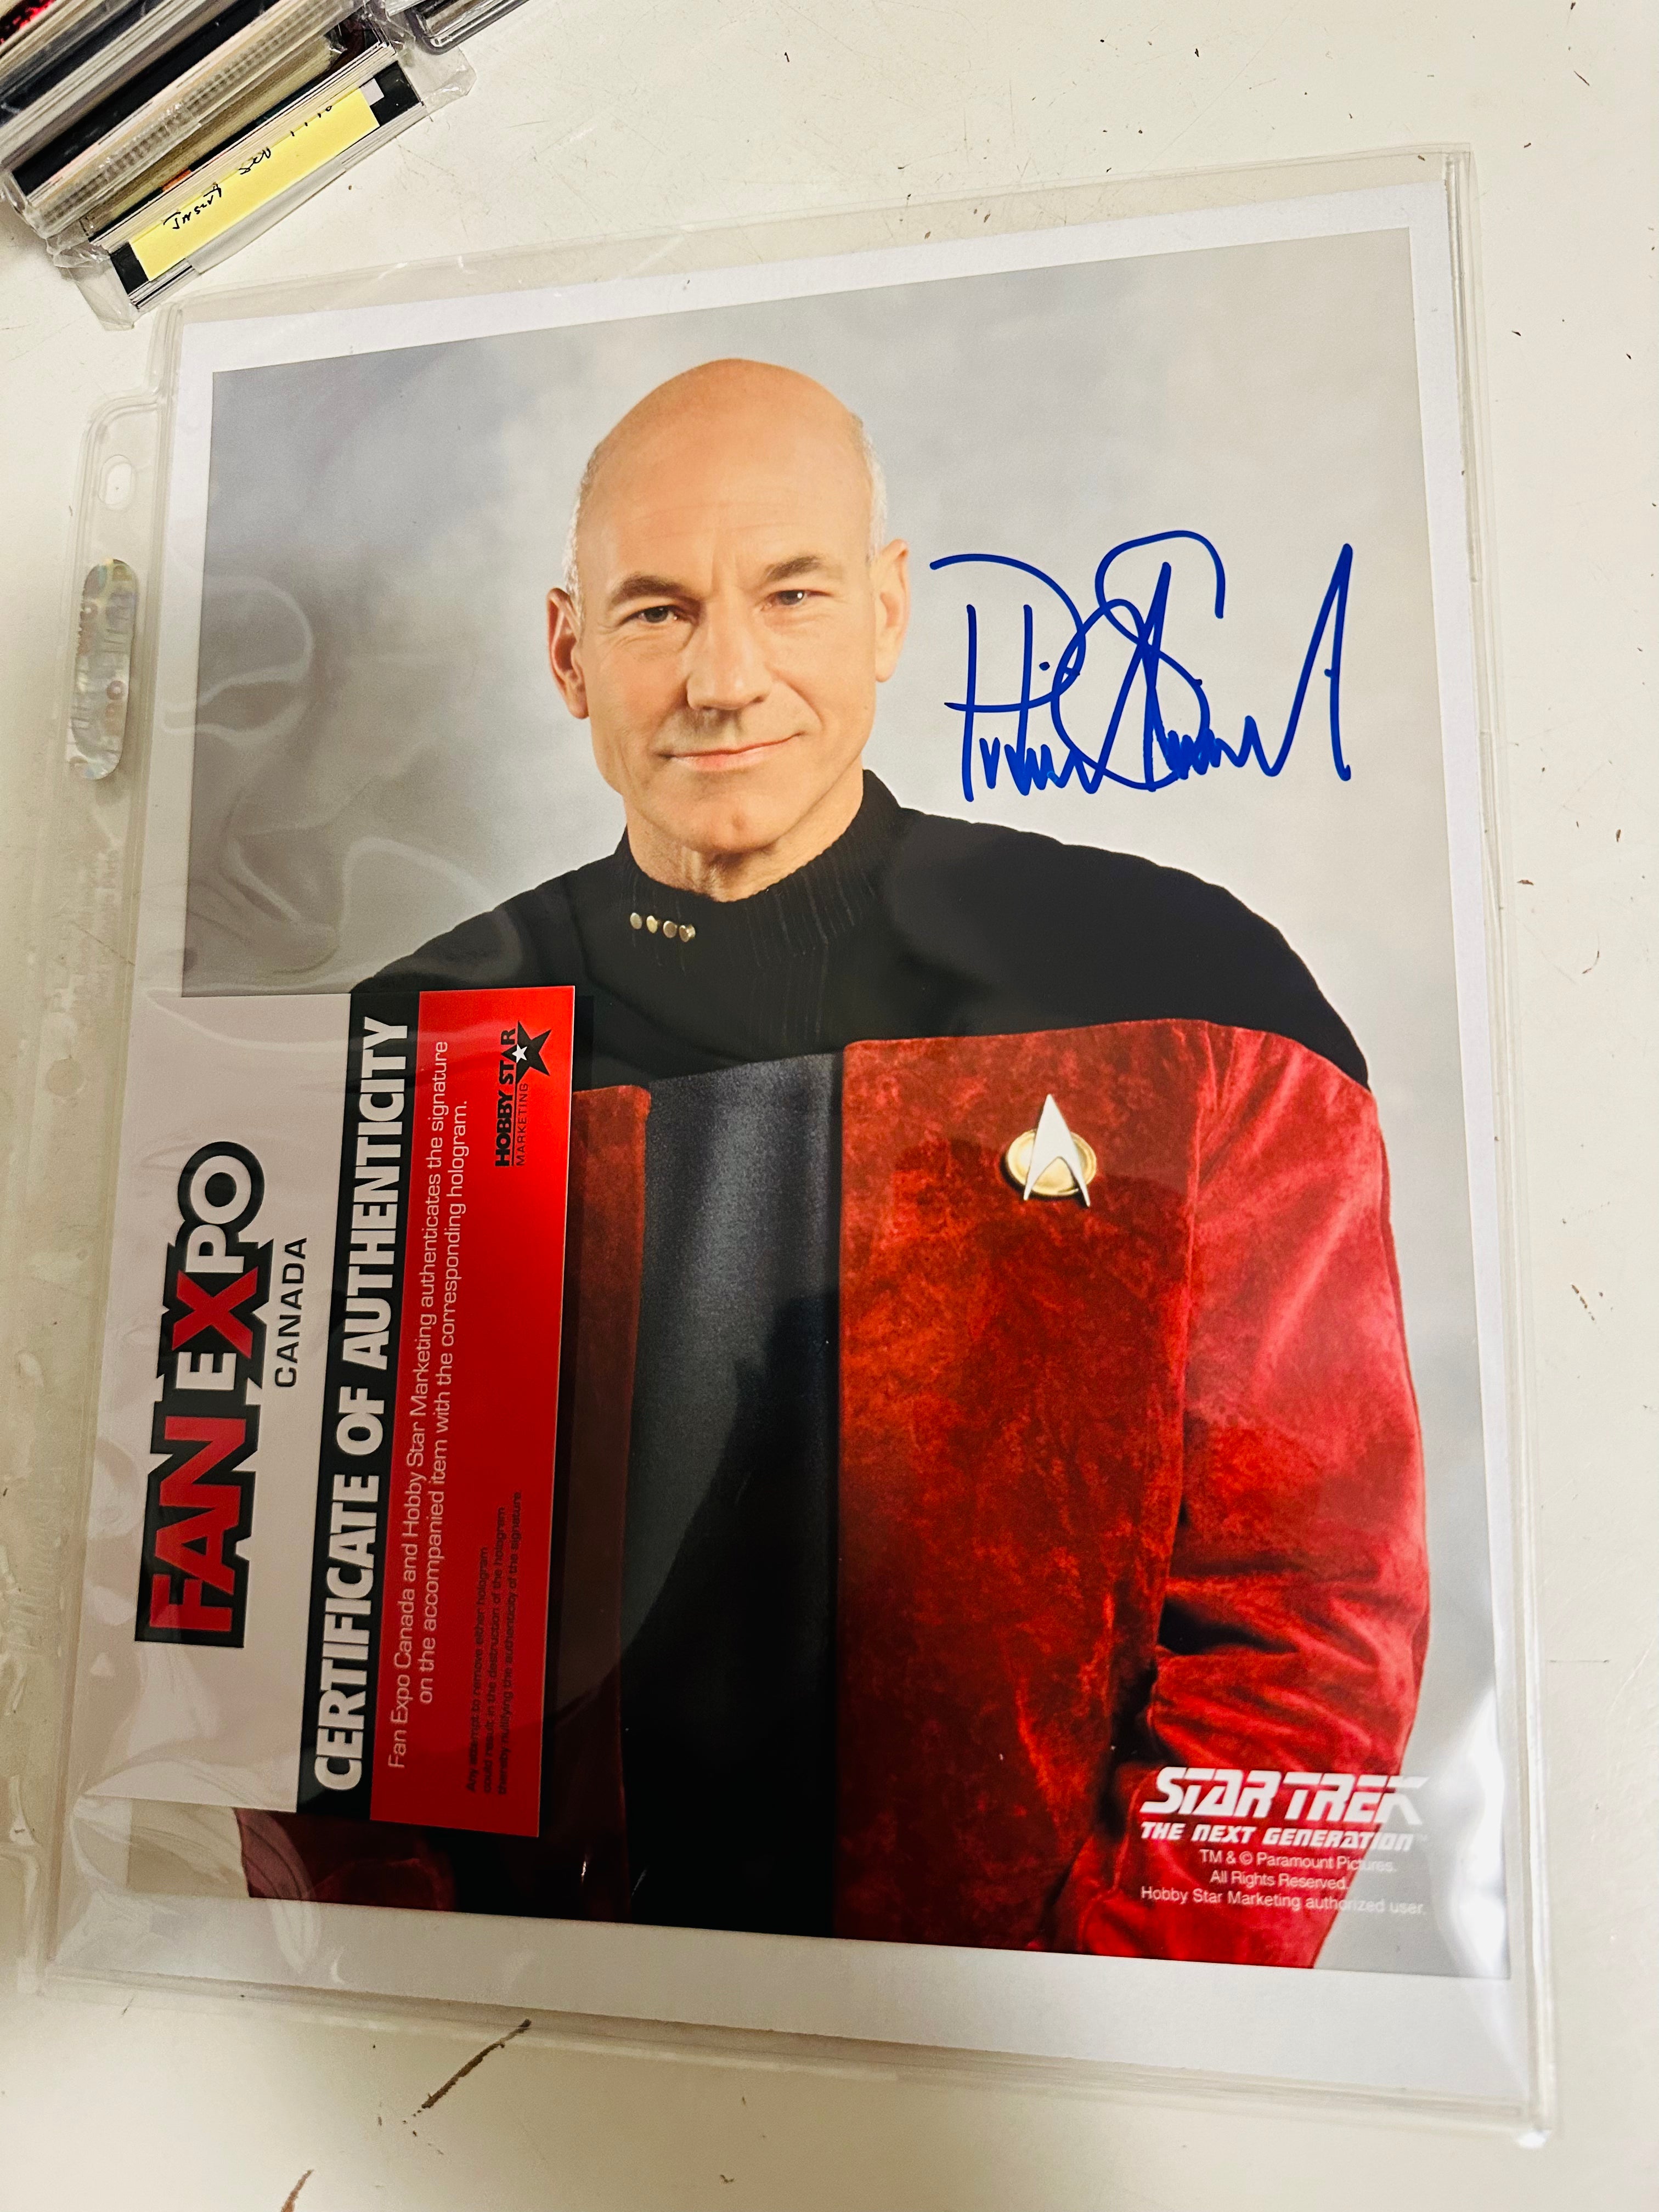 Star Trek Patrick Stewart rare autograph 8x10 photo certified by Fanexpo with COA and Hologram